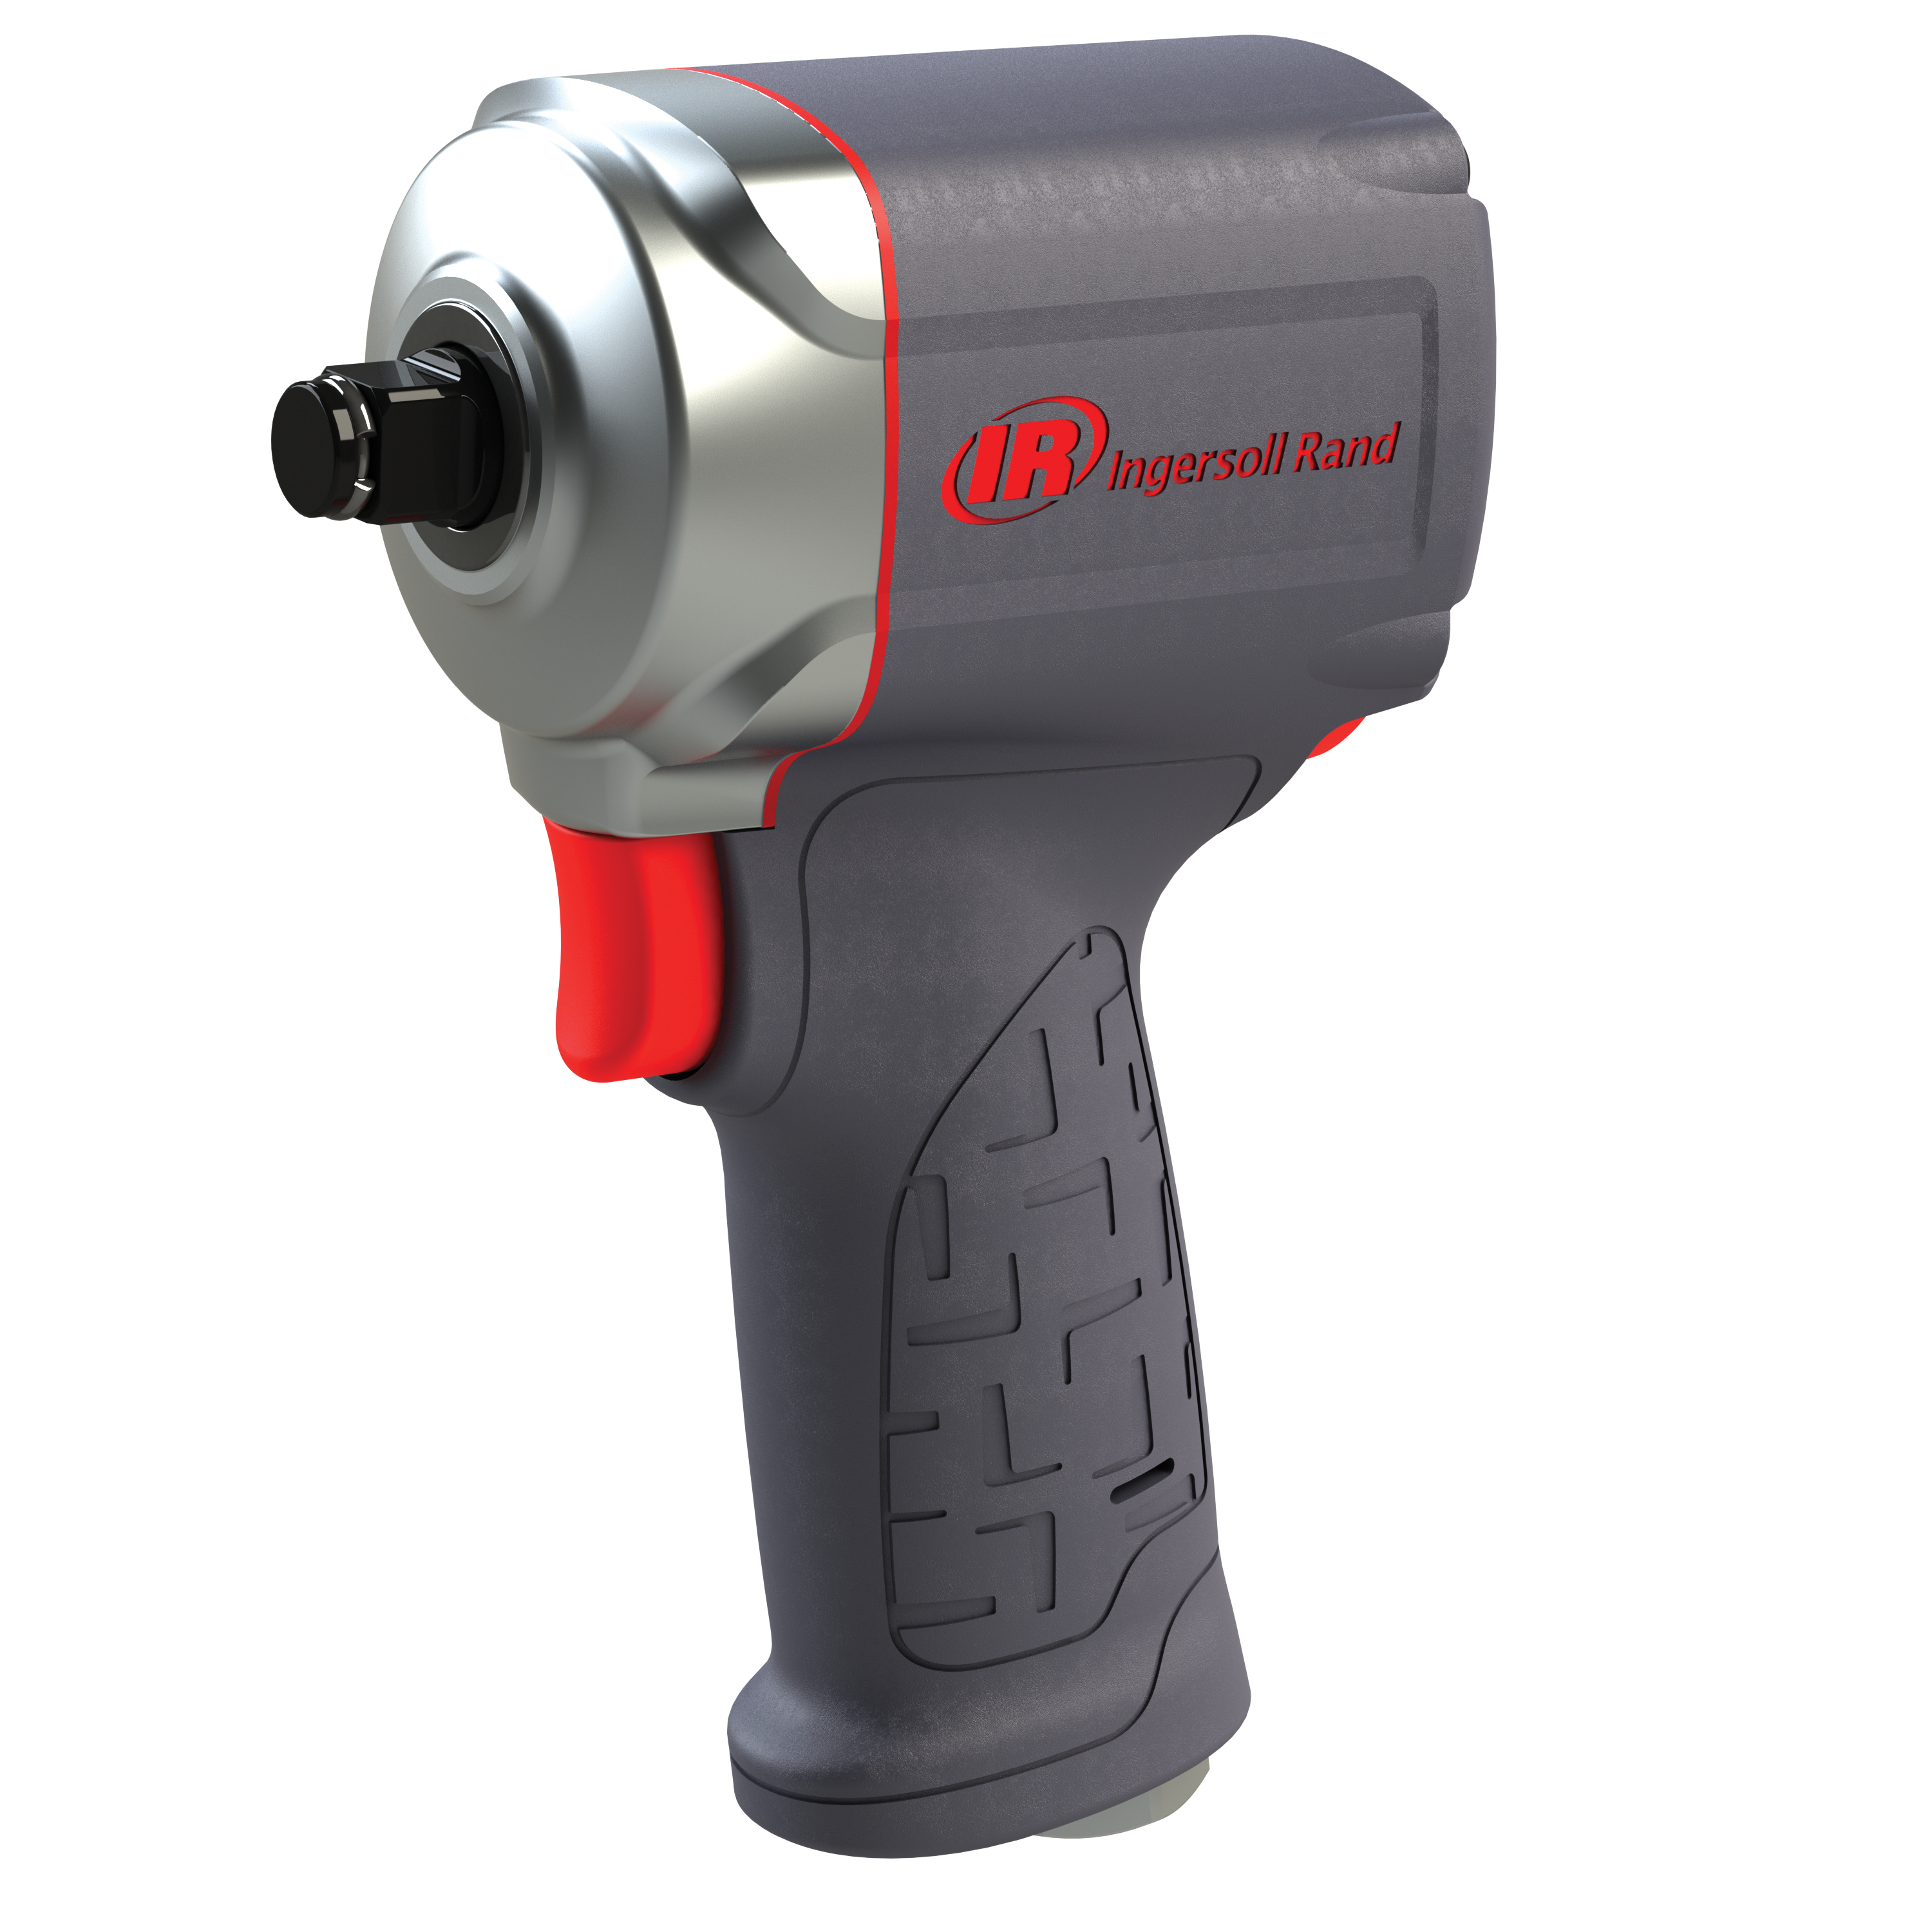 Ingersoll Rand 35MAX Ultra-Compact Impactool, 1/2 Inch